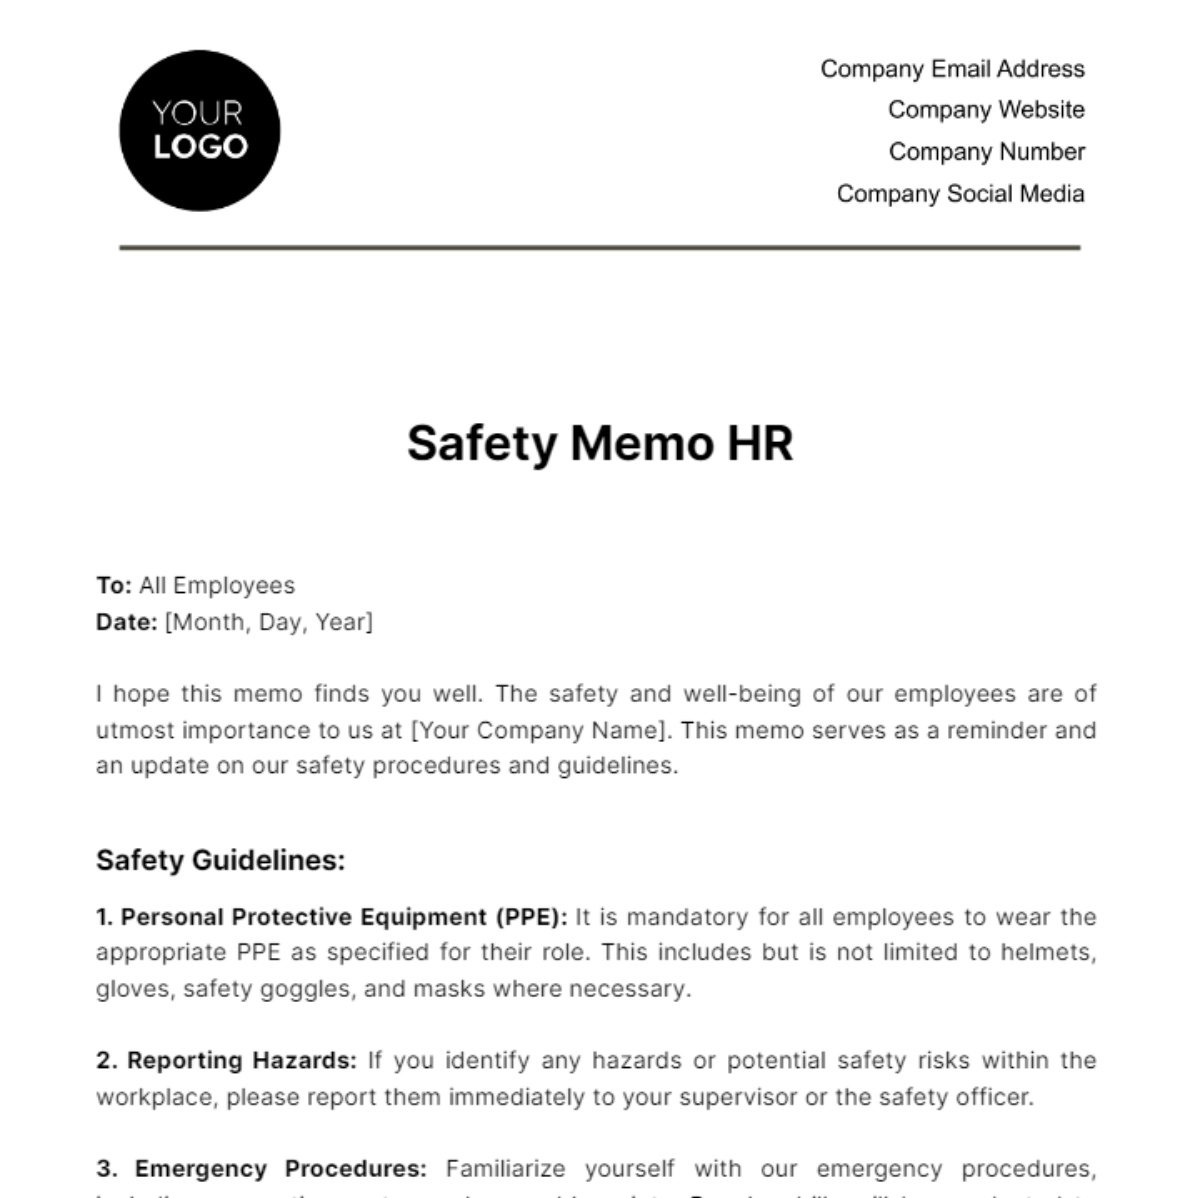 Safety Memo HR Template